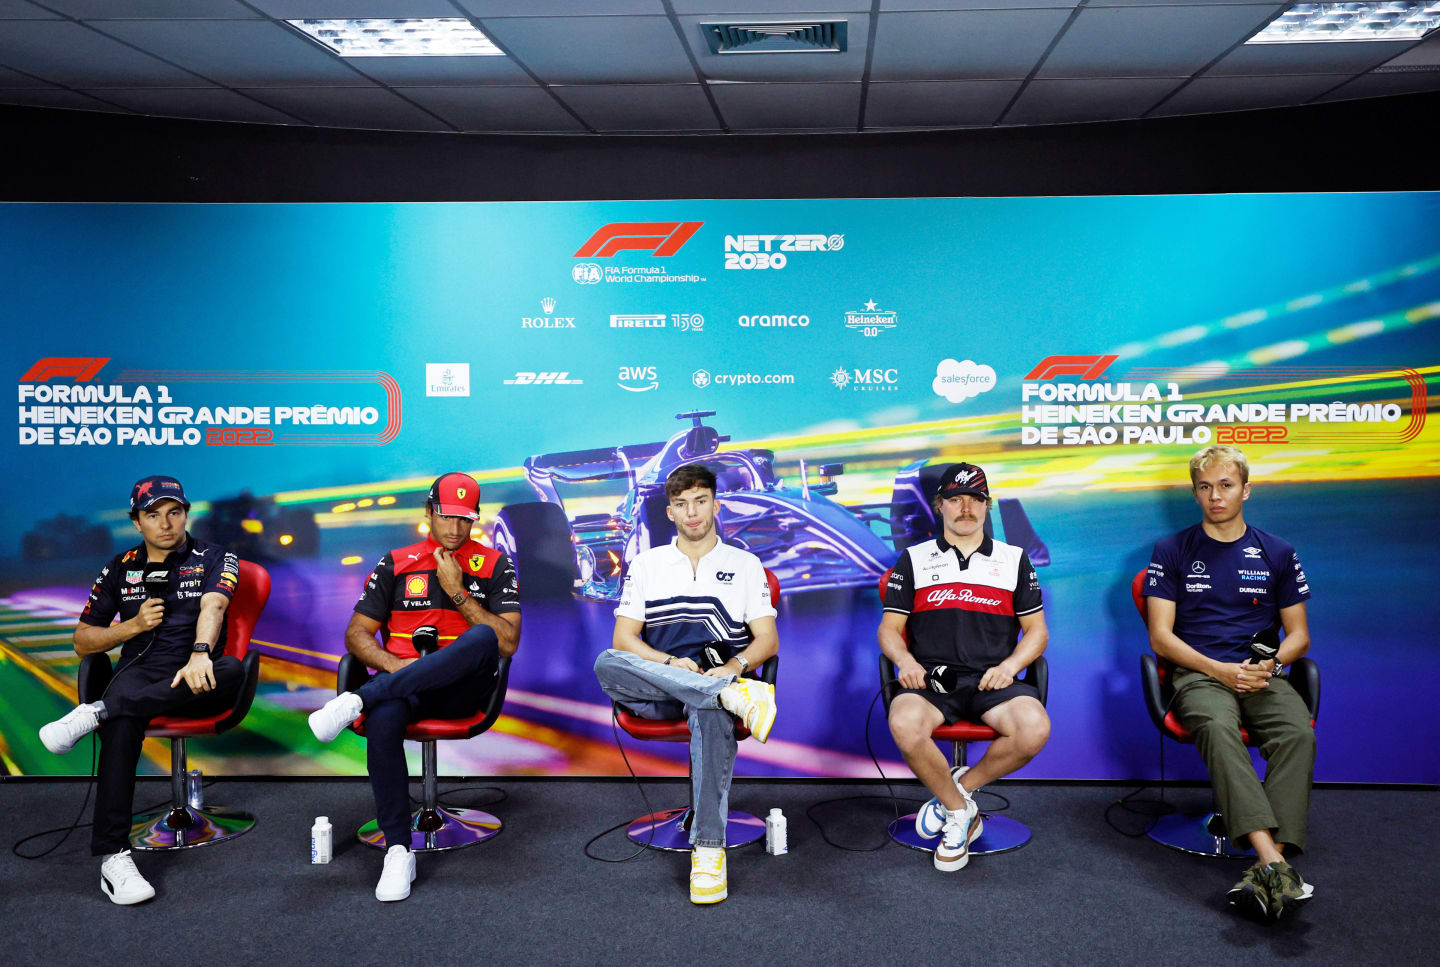 SAO PAULO, BRAZIL - NOVEMBER 10: (L-R) Sergio Perez of Mexico and Oracle Red Bull Racing, Carlos Sainz of Spain and Ferrari, Pierre Gasly of France and Scuderia AlphaTauri, Valtteri Bottas of Finland and Alfa Romeo F1 and Alexander Albon of Thailand and Williams attend the Drivers Press Conference during previews ahead of the F1 Grand Prix of Brazil at Autodromo Jose Carlos Pace on November 10, 2022 in Sao Paulo, Brazil. (Photo by Jared C. Tilton/Getty Images)